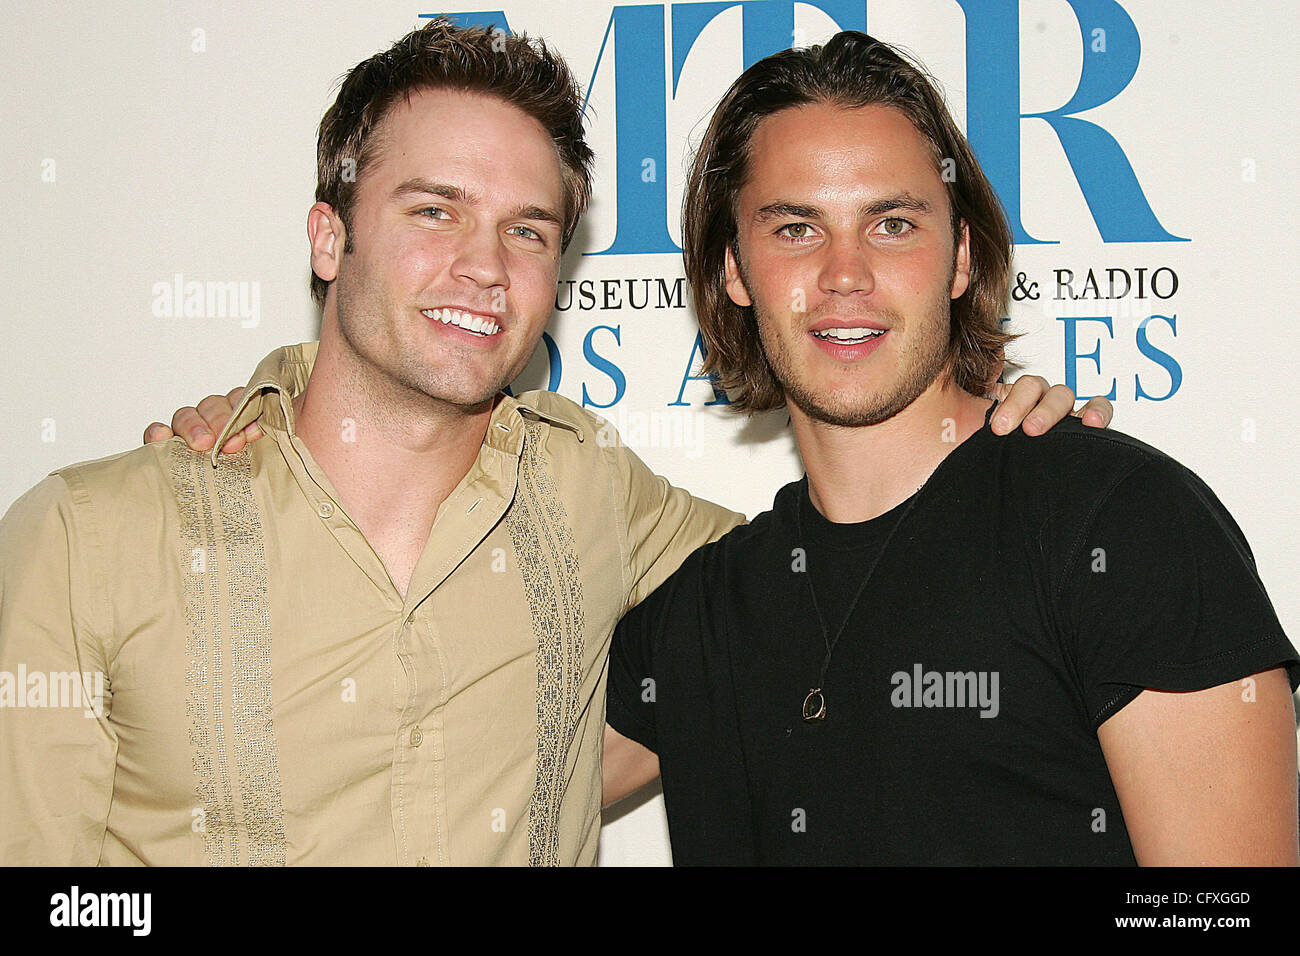 © 2007 Jerome Ware/Zuma Press  SCOTT PORTER and TAYLOR KITSCH at the Museum of Television & Radios 'It's Not (Just) about Football... Friday Night Lights' event, held at the Museum of Television & Radio in Beverly Hills, CA.  Friday, April 13, 2007 The Museum of Television & Radio Beverly Hills, CA Stock Photo